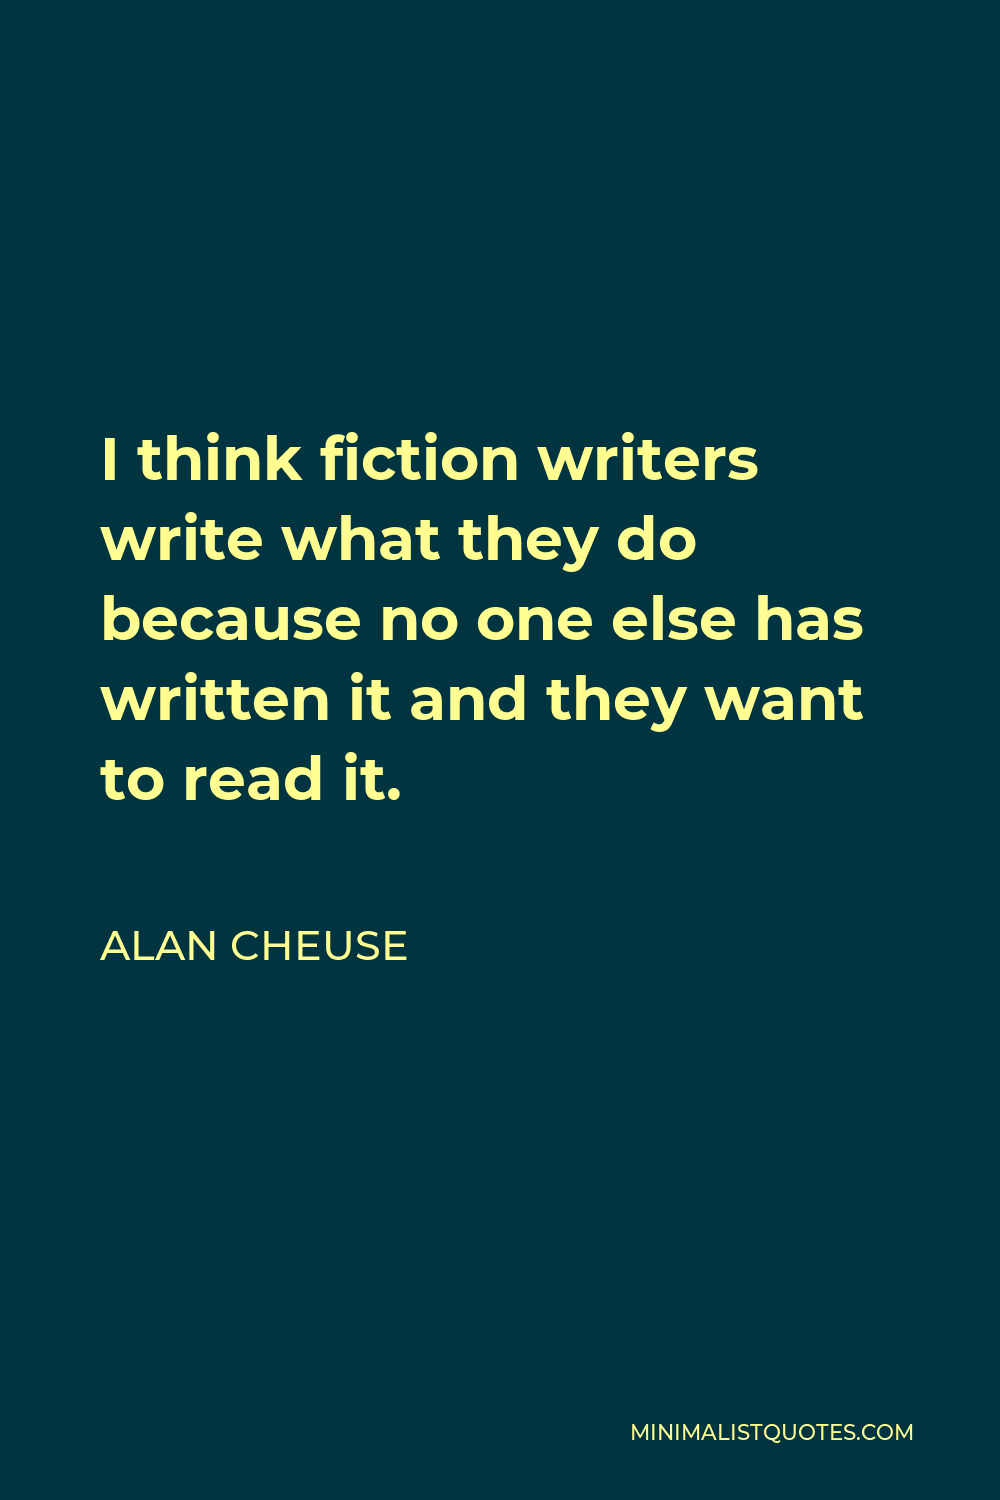 Alan Cheuse Quote - I think fiction writers write what they do because no one else has written it and they want to read it.